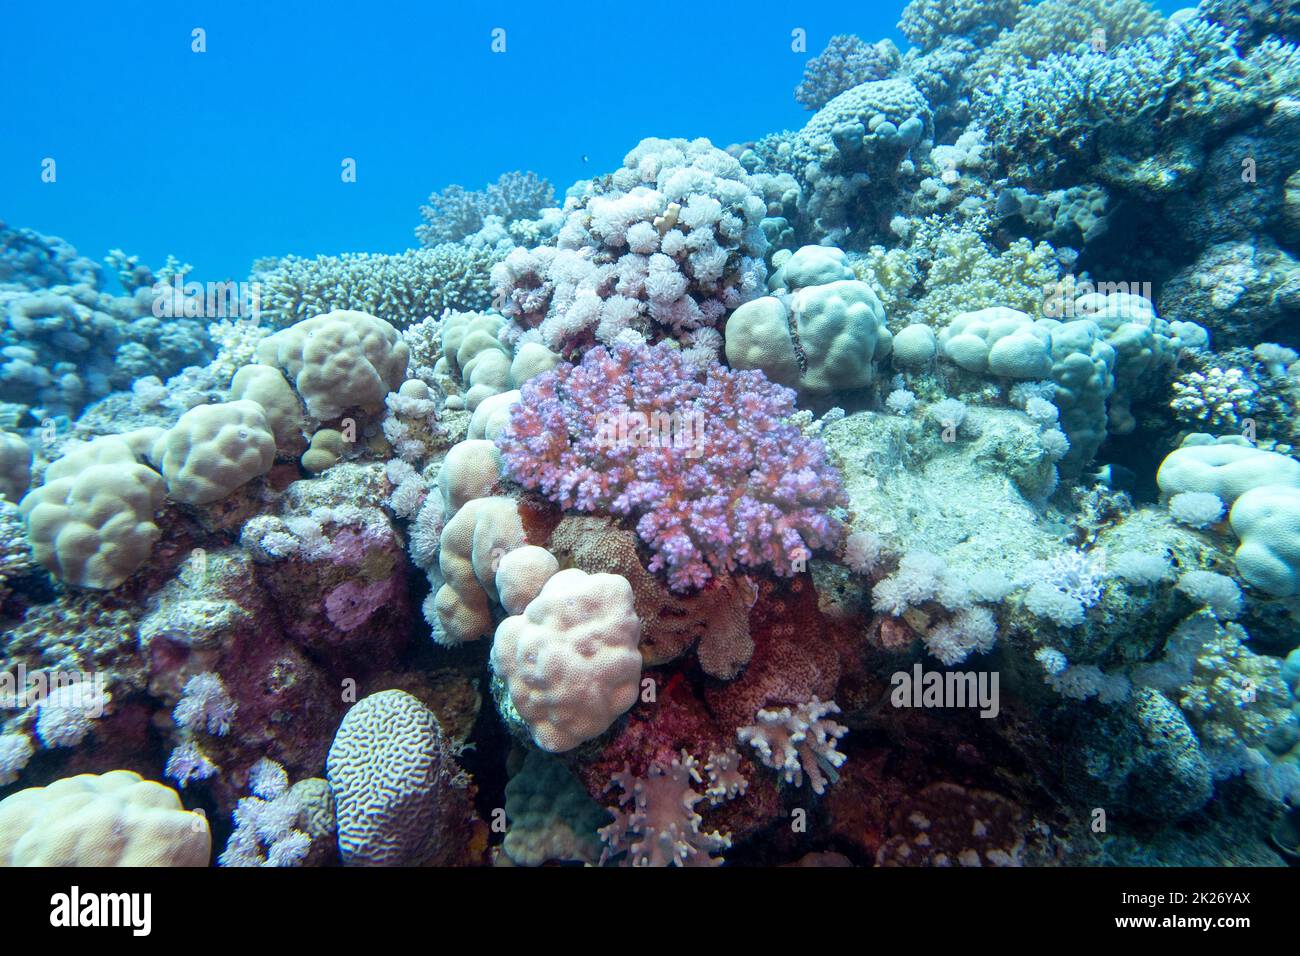 Colorful, picturesque coral reef at the bottom of tropical sea, different types of hard coral and violet Pocillopora, underwater landscape Stock Photo